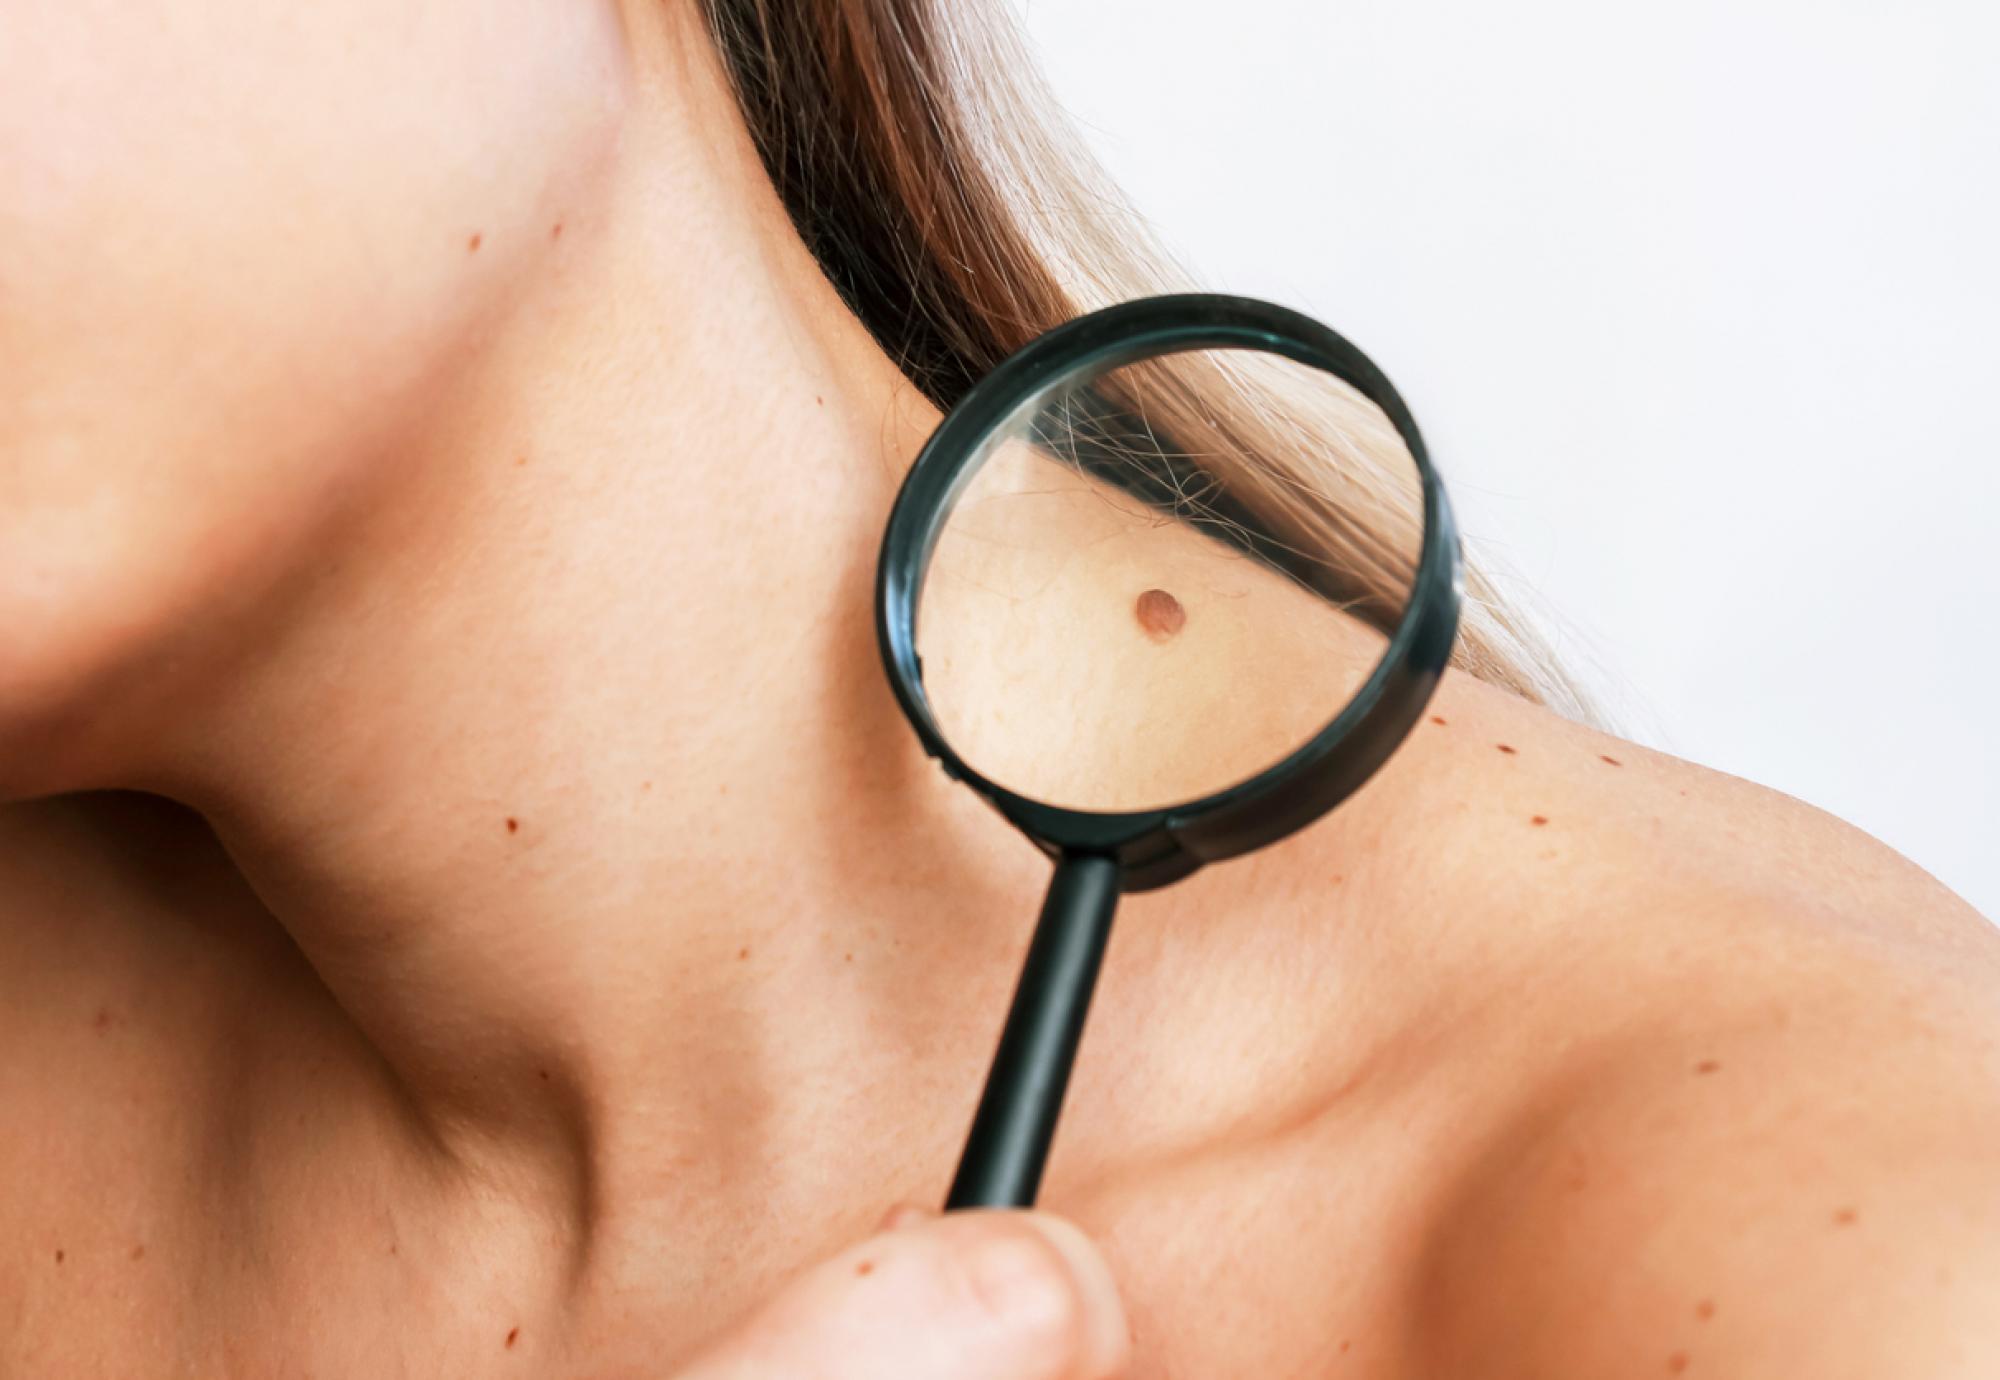 Mole on a woman's neck being magnified